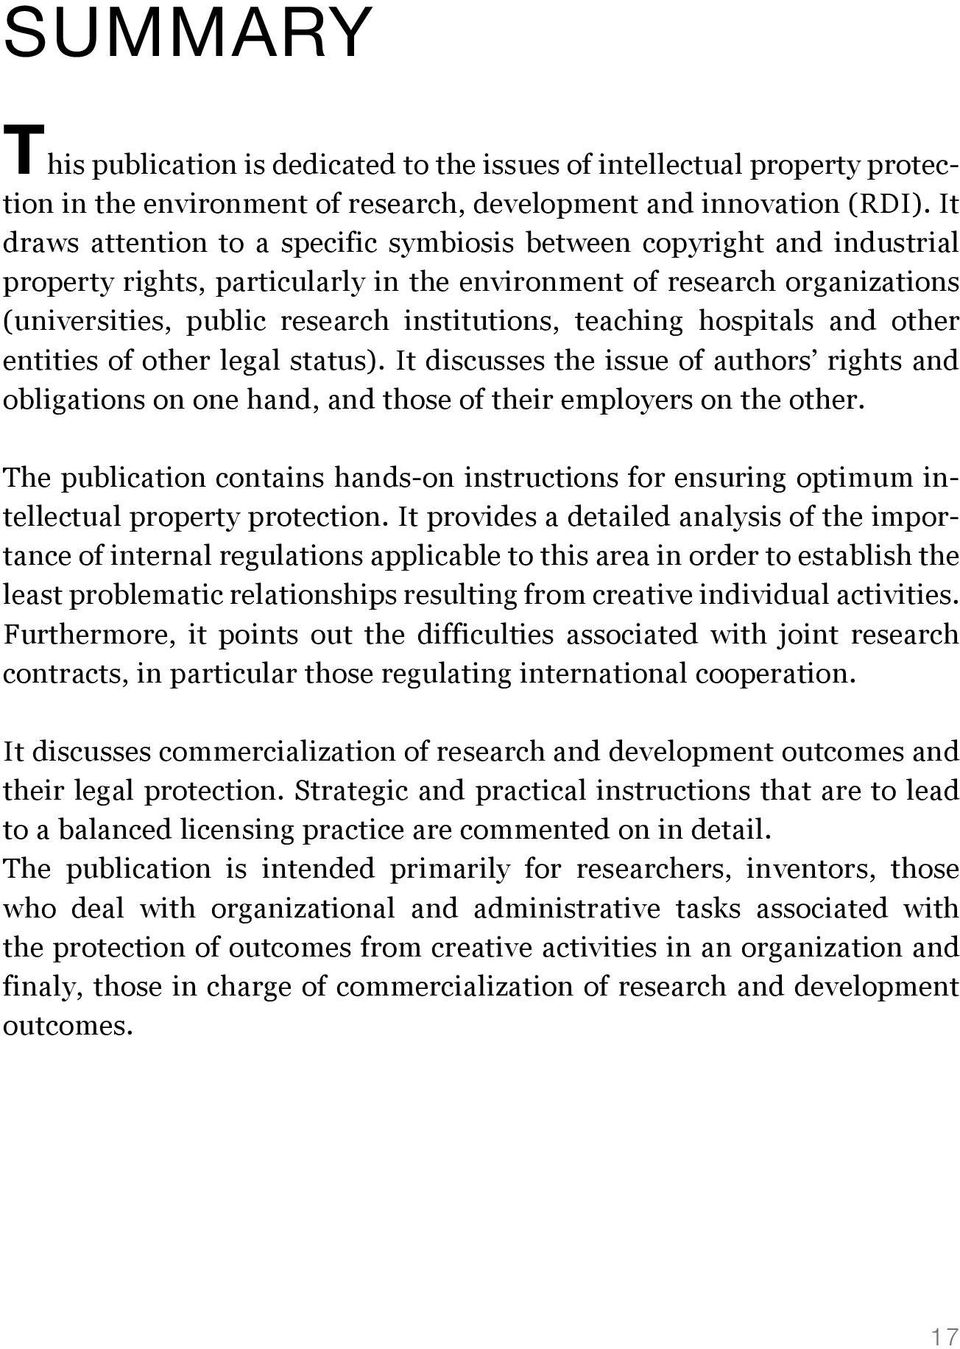 teaching hospitals and other entities of other legal status). It discusses the issue of authors rights and obligations on one hand, and those of their employers on the other.